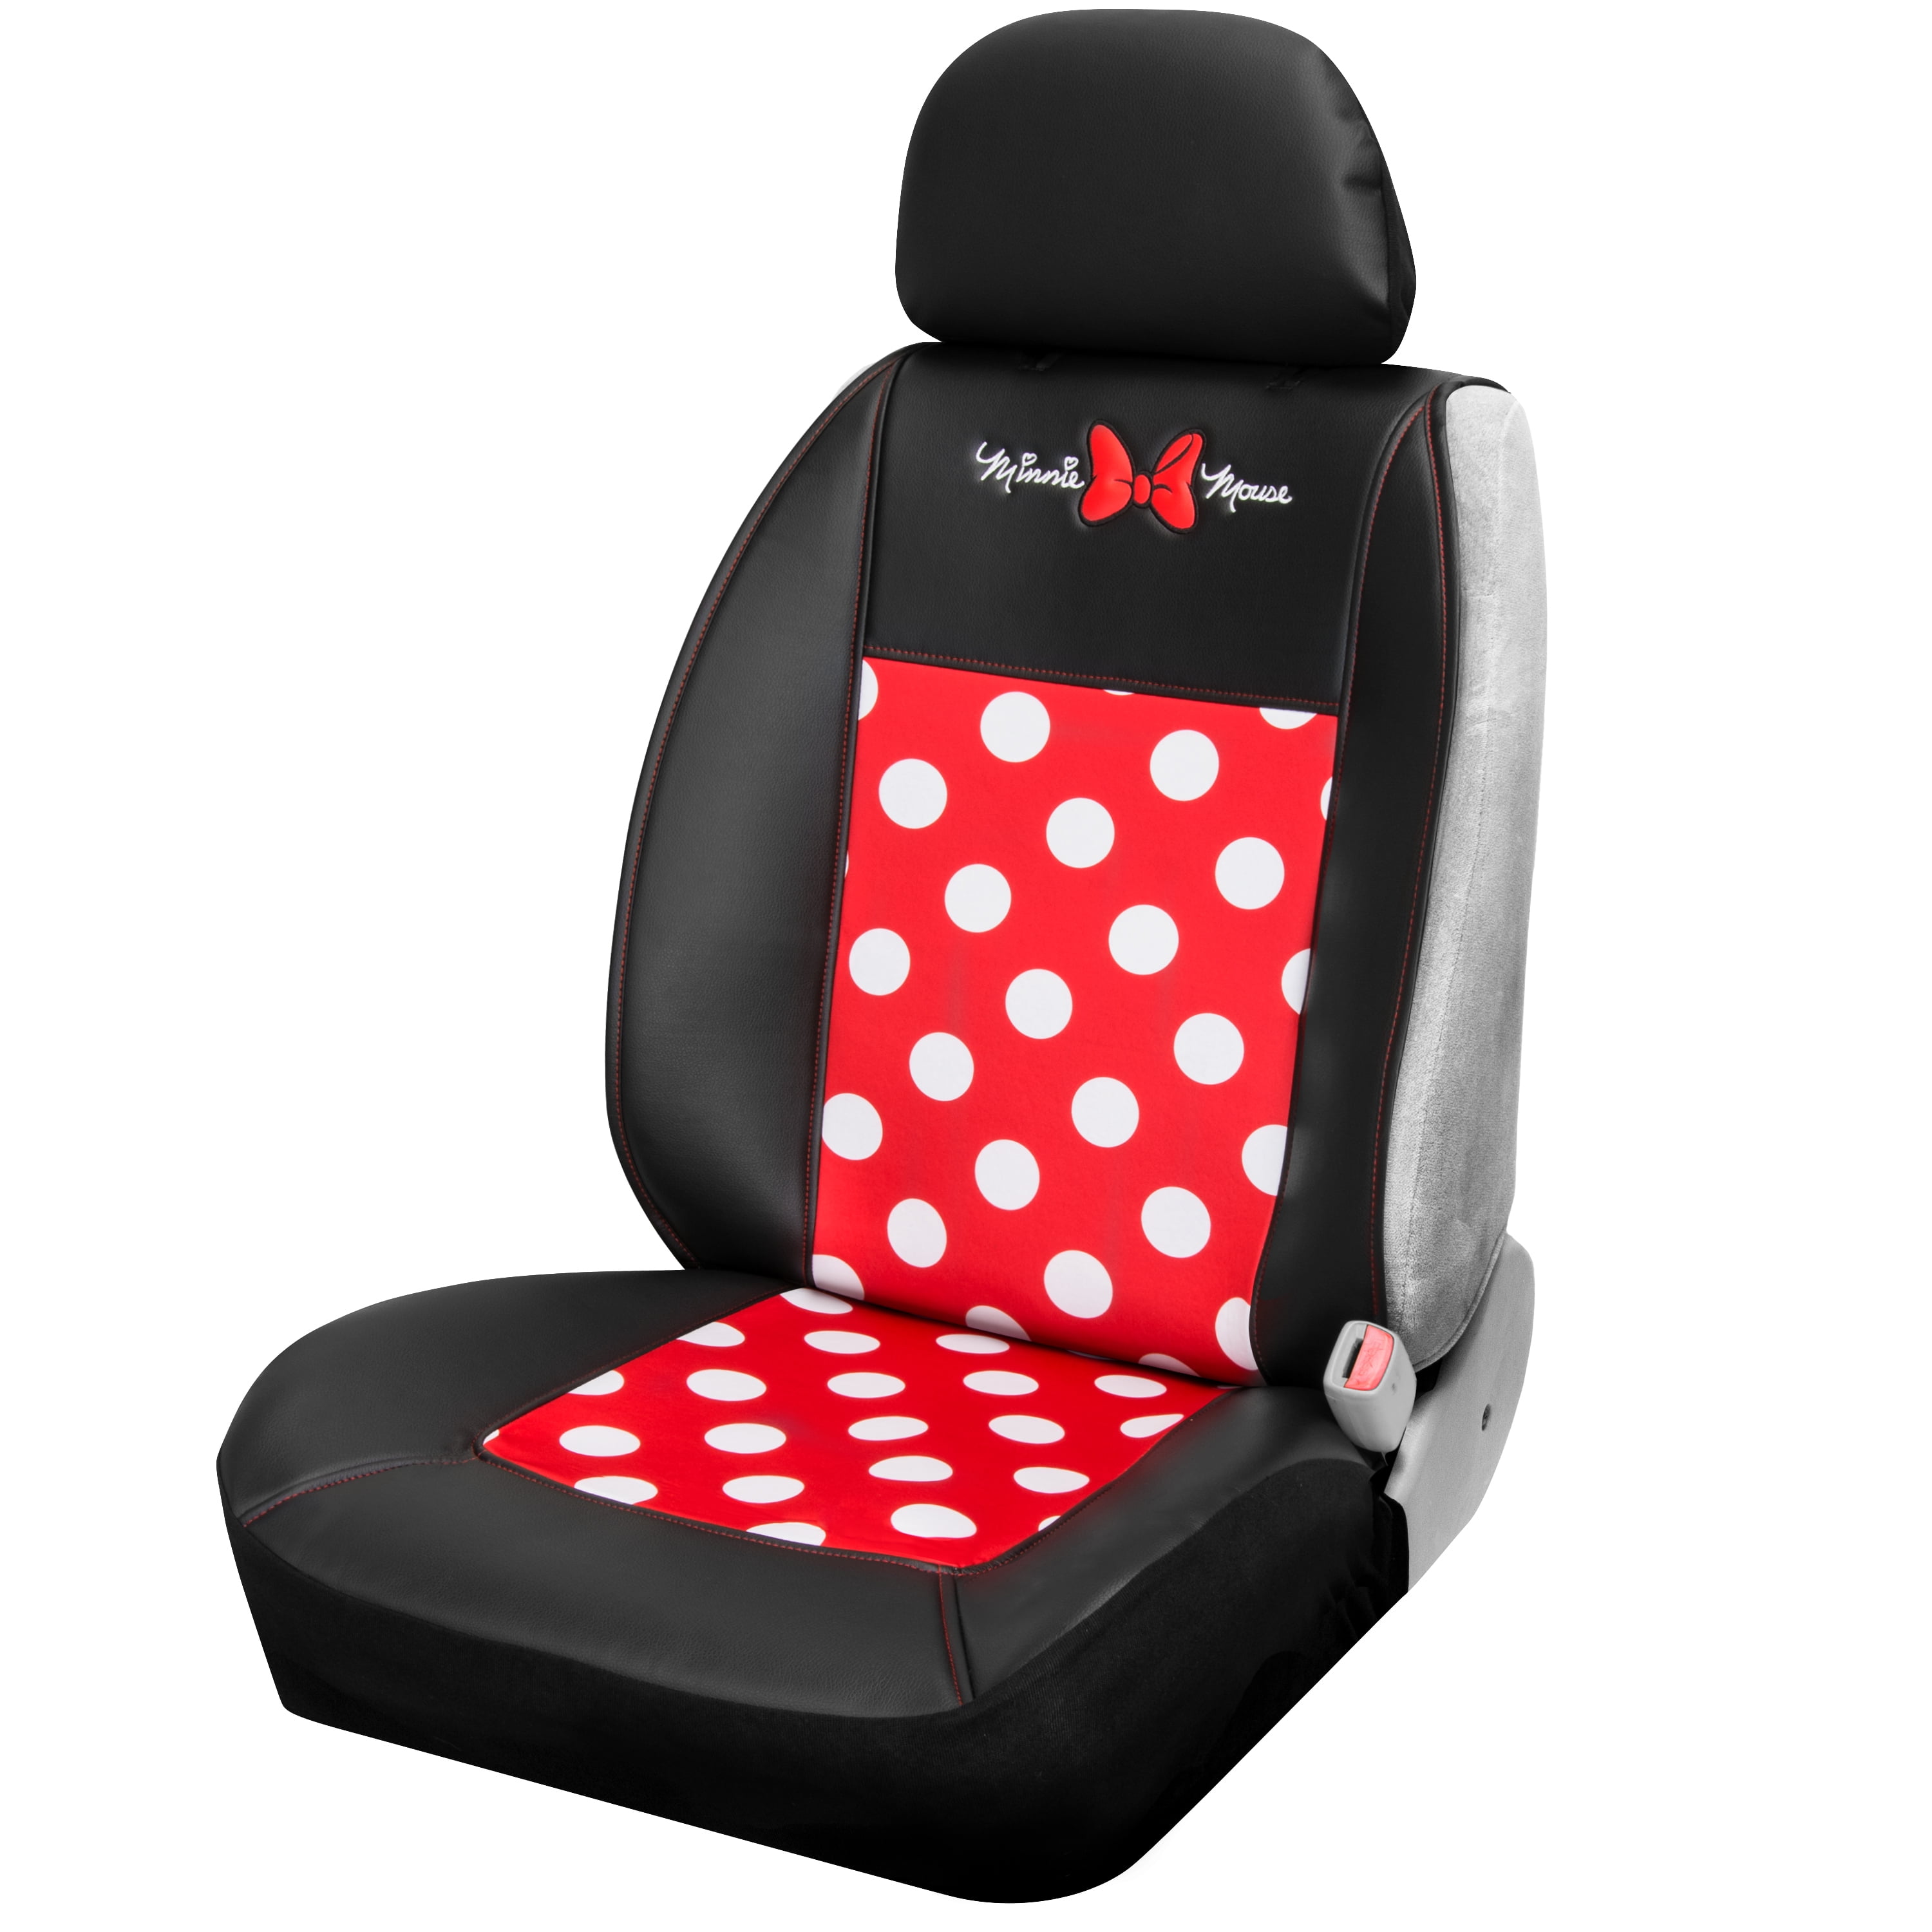 Minnie Mouse Seat Cover - Walmart.com 